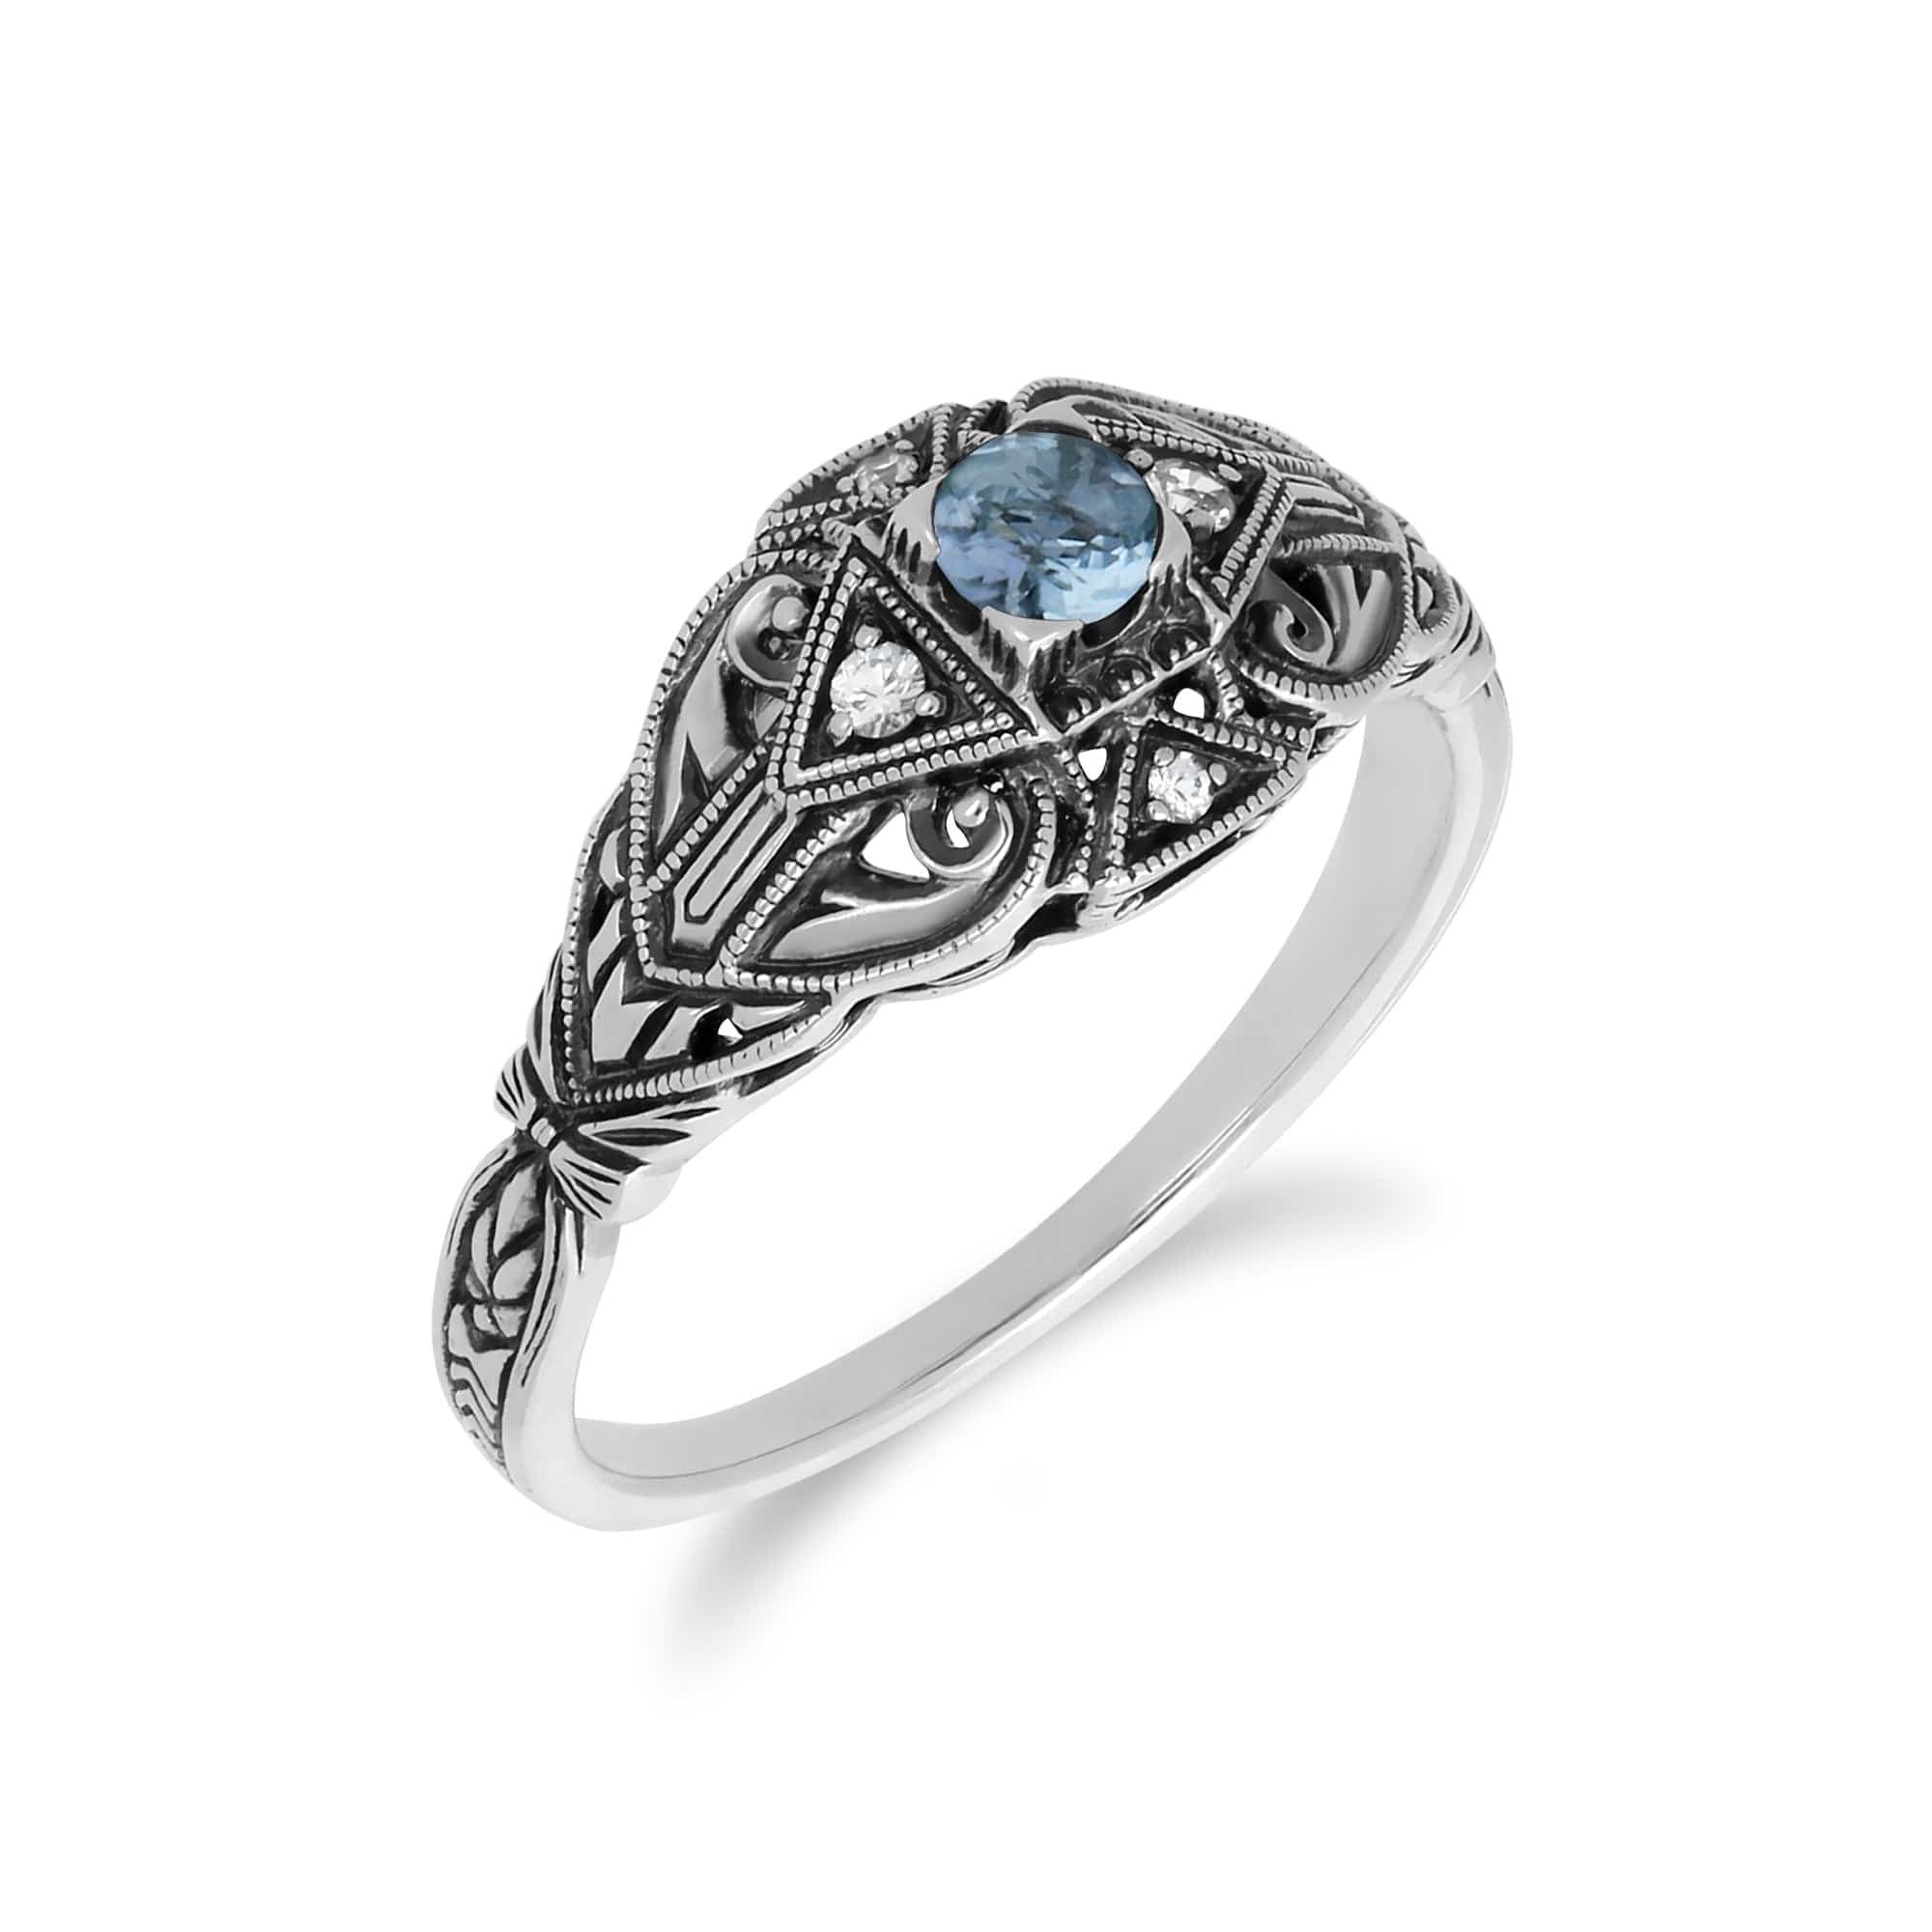 241R210303925 Art Deco Style Round Blue Topaz & White Topaz  Ring in 925 Sterling Silver 2